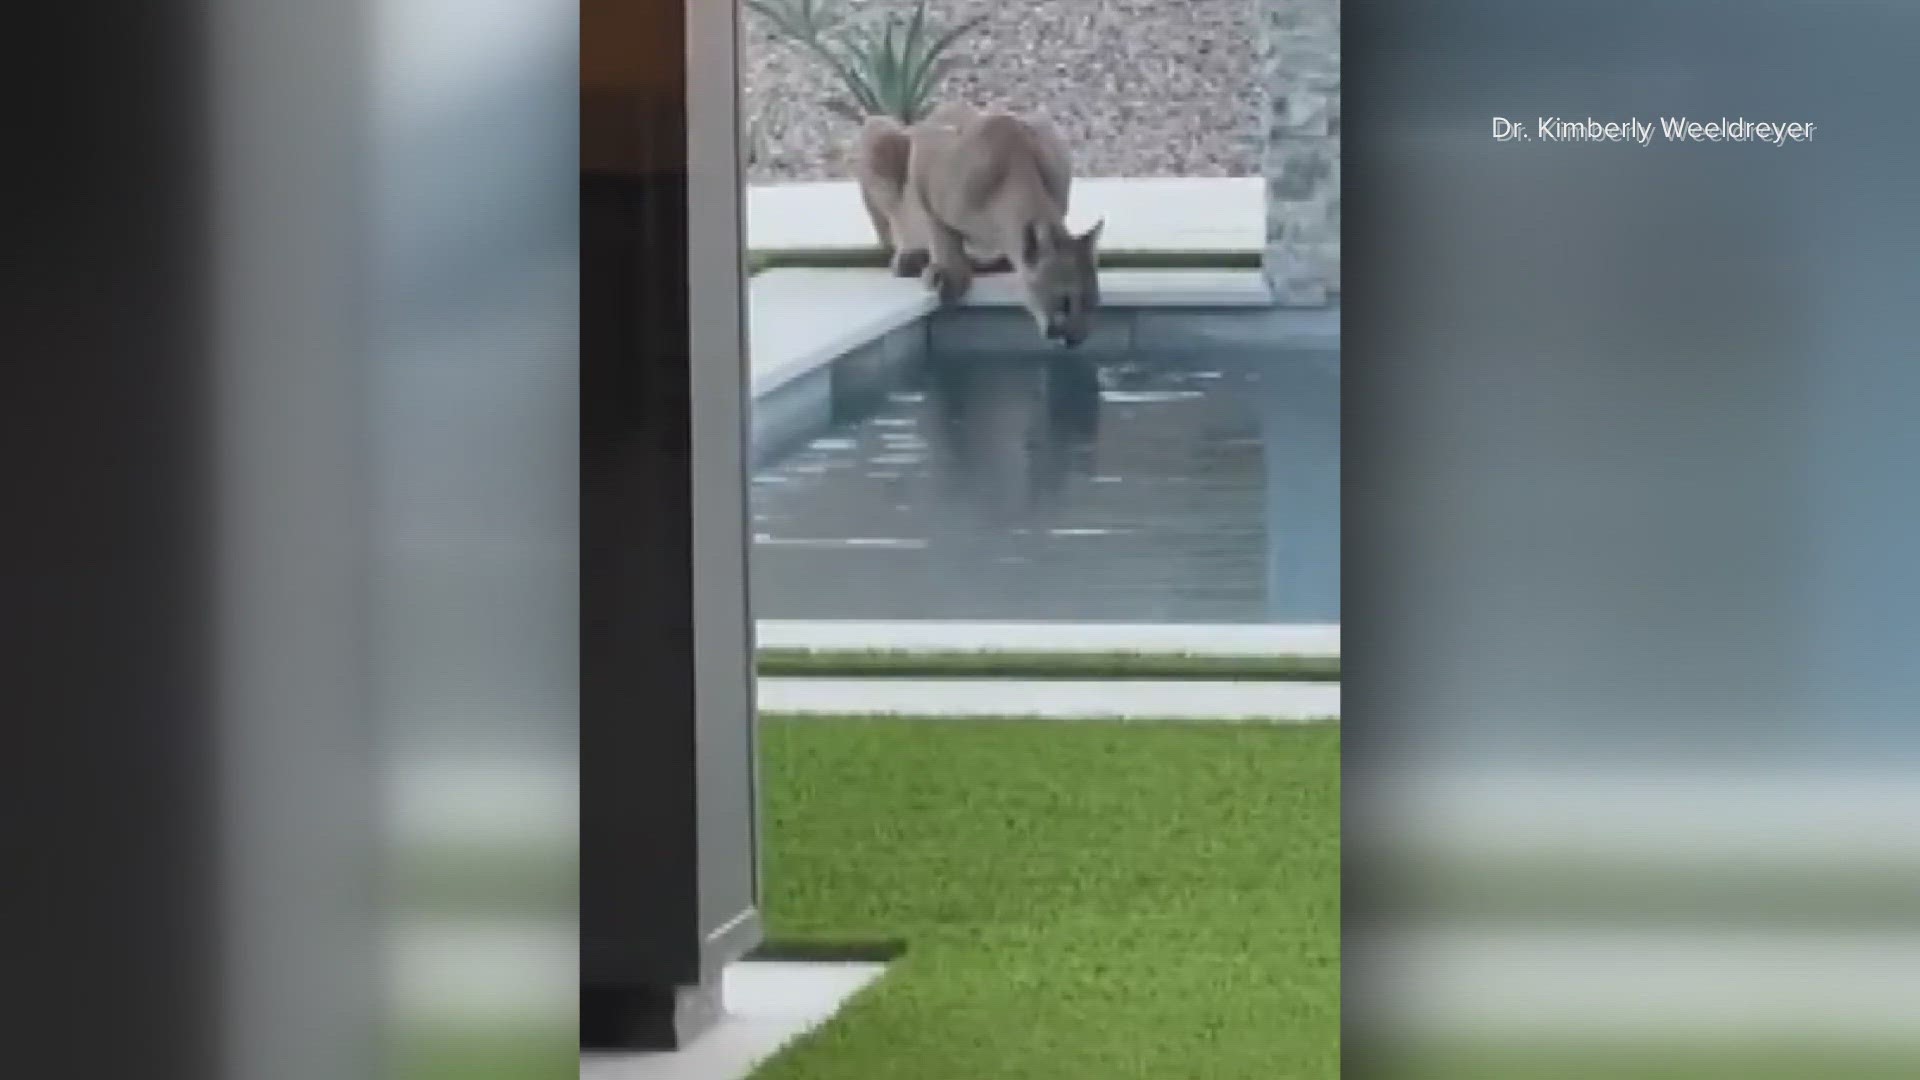 A 12News viewer sent in video of a mountain lion taking a drink of water from a backyard pool near Scottsdale, Arizona.